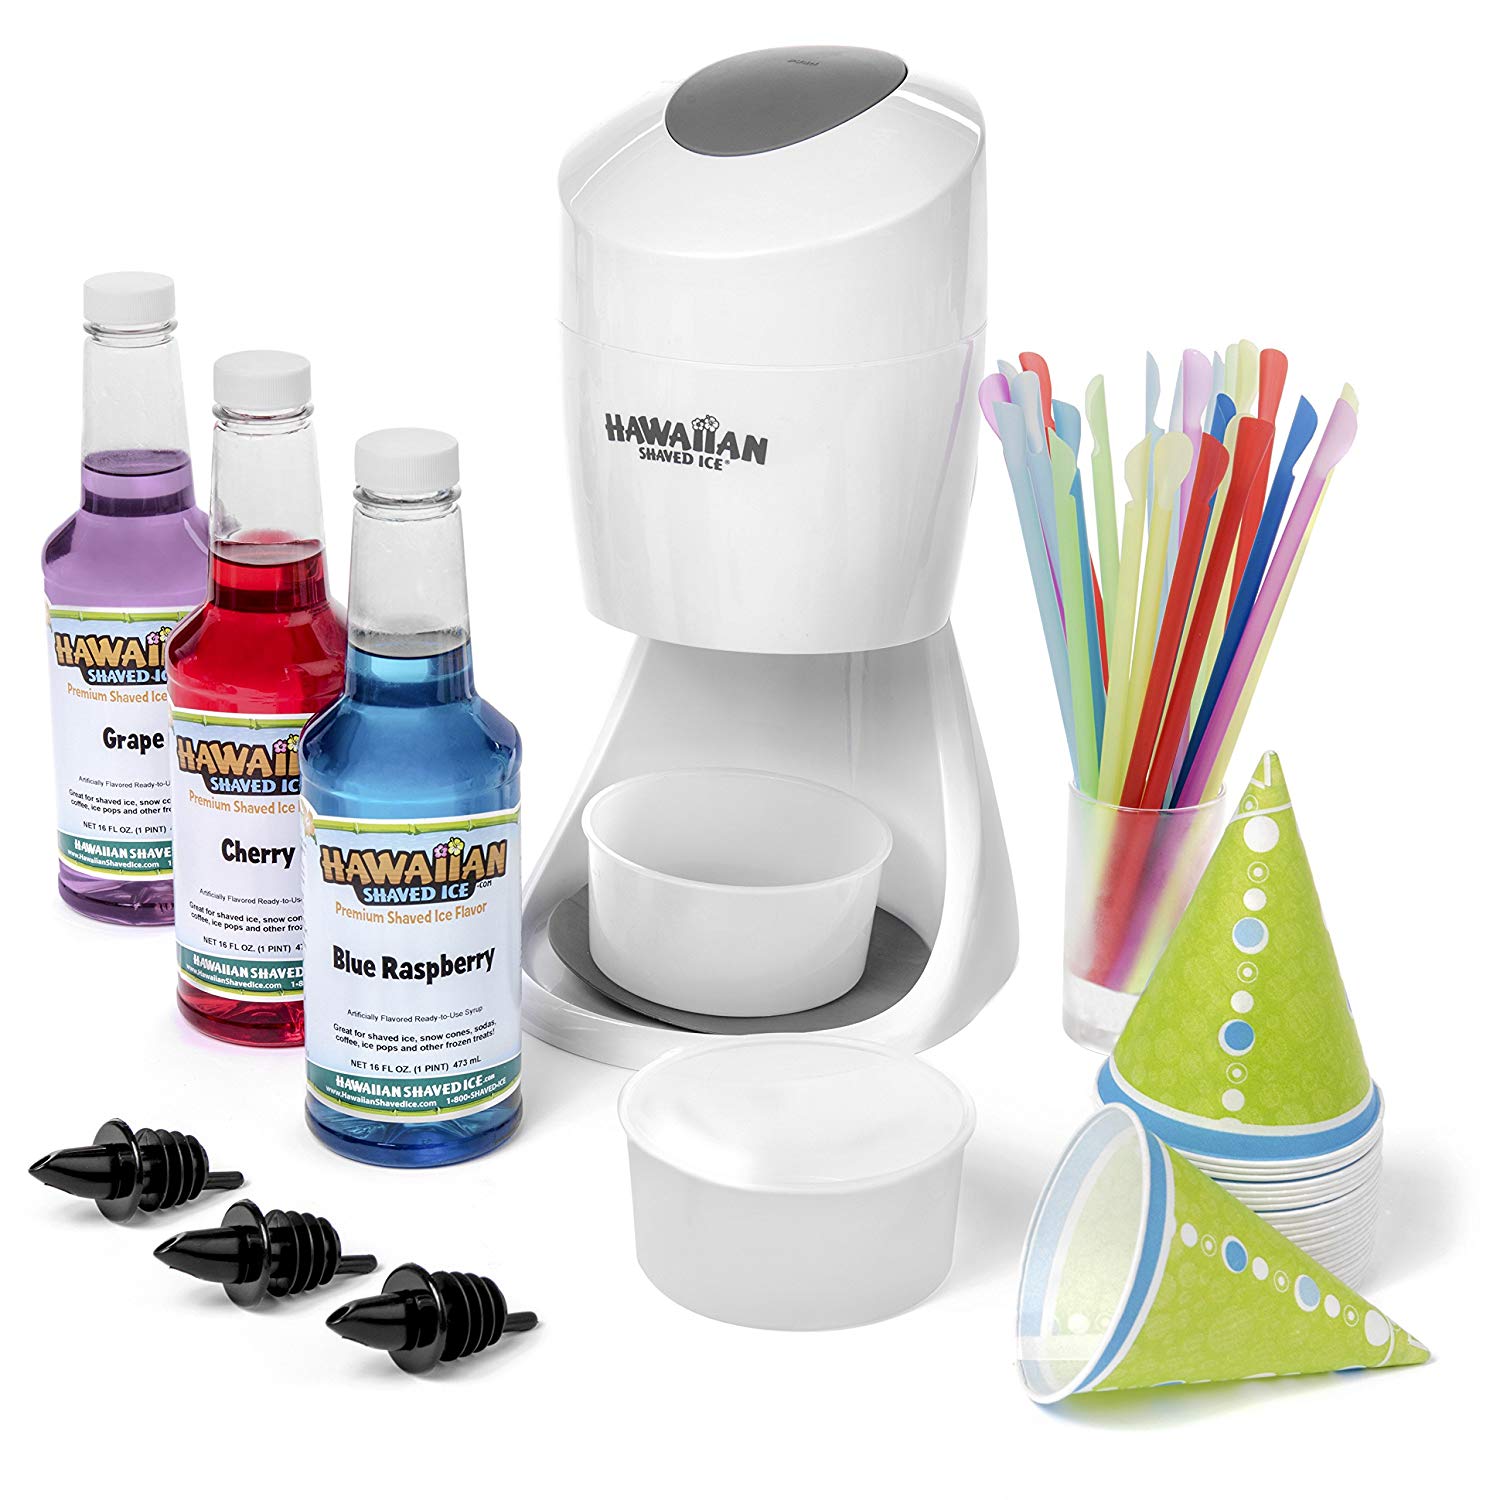 Shaved Ice Machine and Syrup Party Package by Hawaiian Shaved Ice | Includes S900 Shaved Ice Machine, 3 Ready-To-Use Pints of Syrup, 25 Snow Cone Cups, 25 Spoon Straws, &amp; 3 Black Bottle Pourers